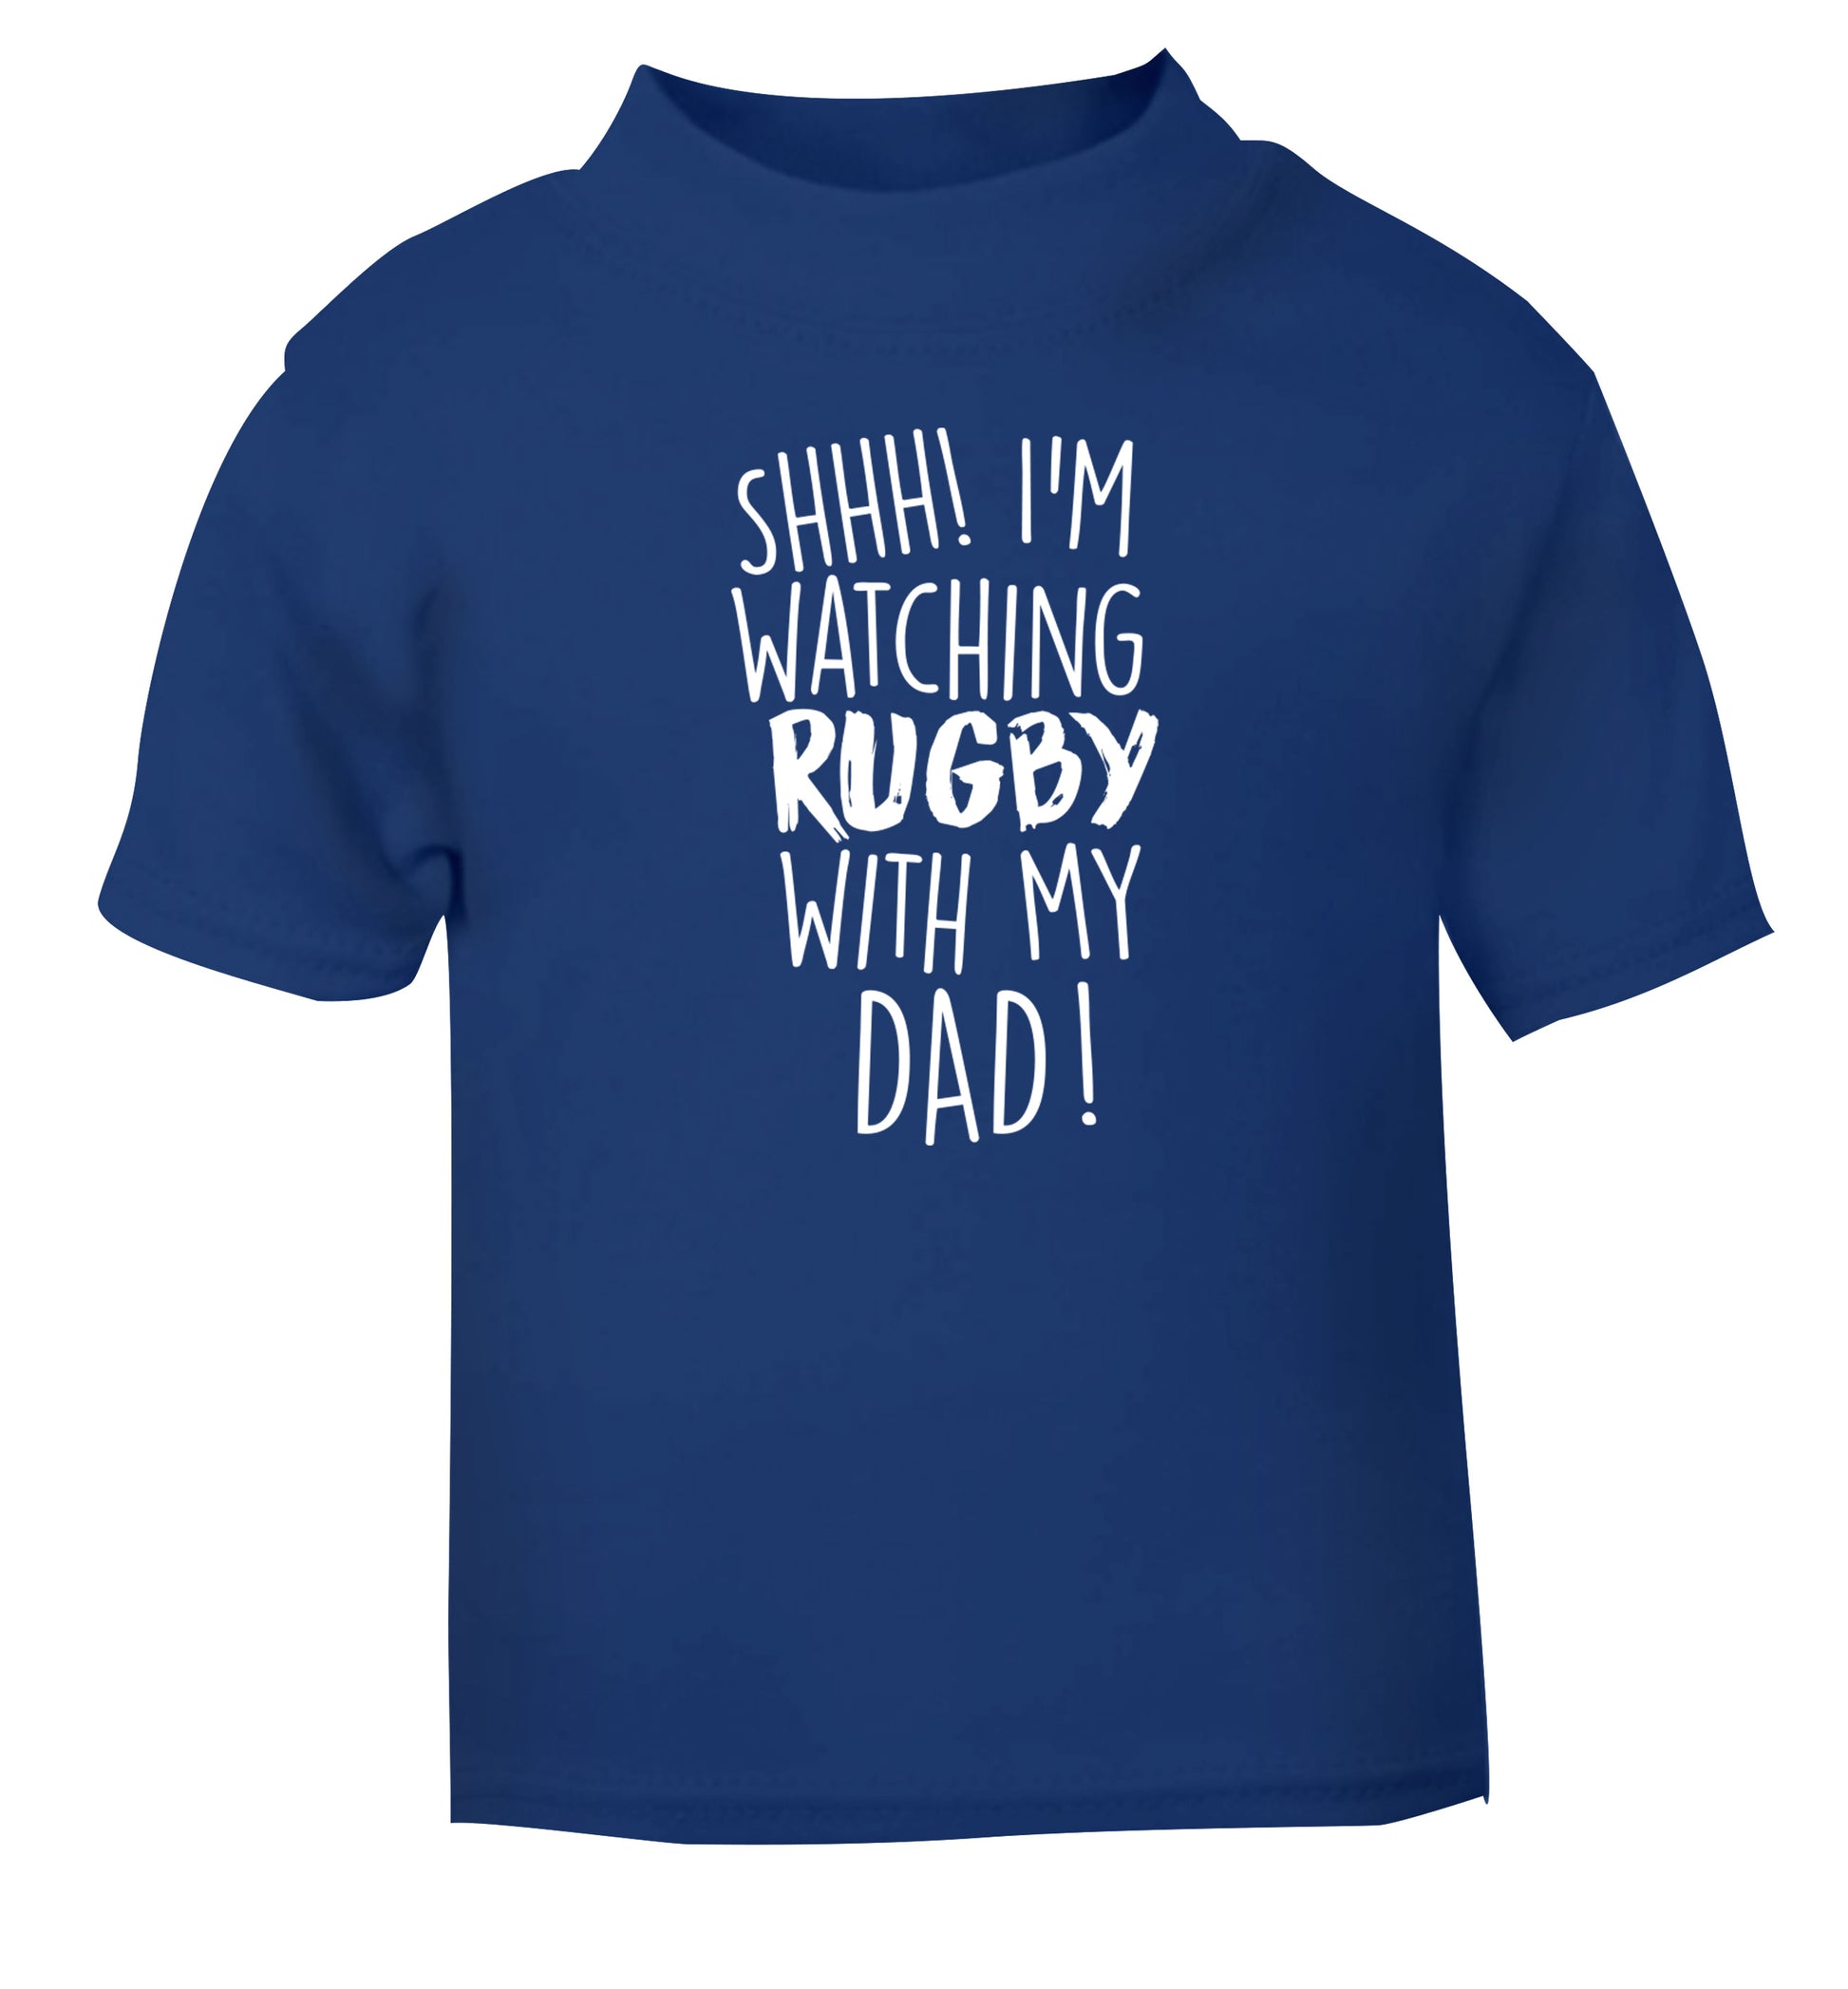 Shh... I'm watching rugby with my dad blue Baby Toddler Tshirt 2 Years